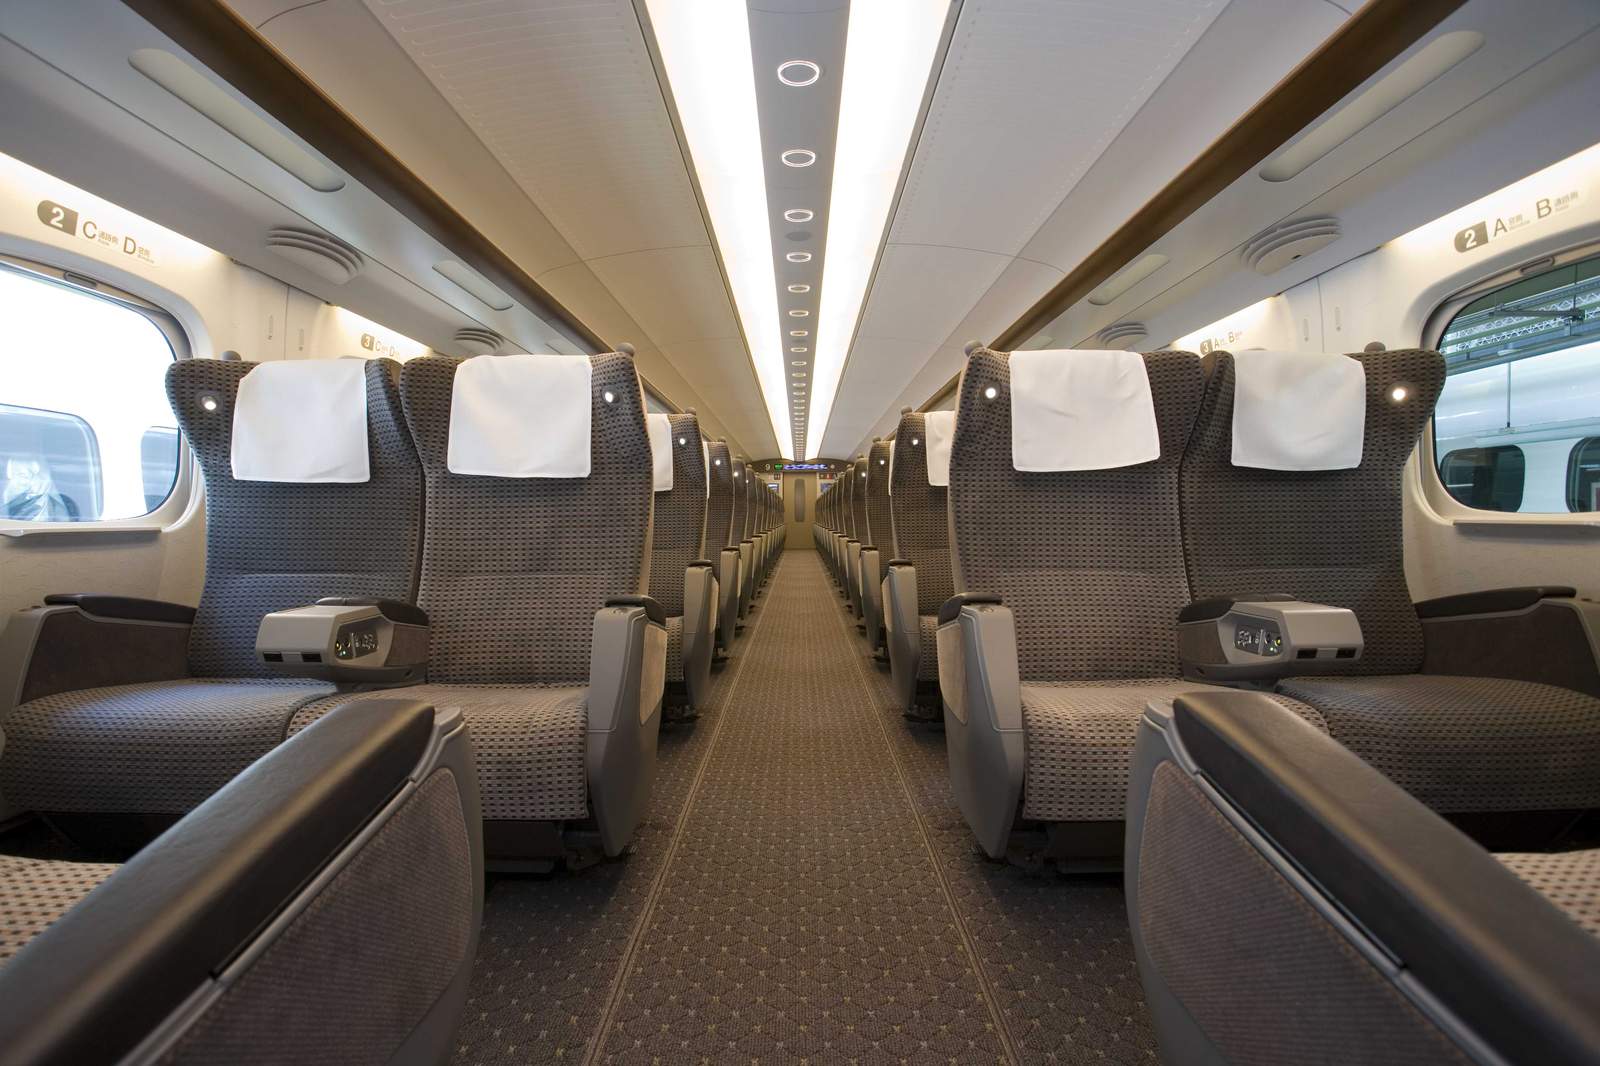 Here is a first look at the Texas High-Speed Train that will connect Houston and Dallas